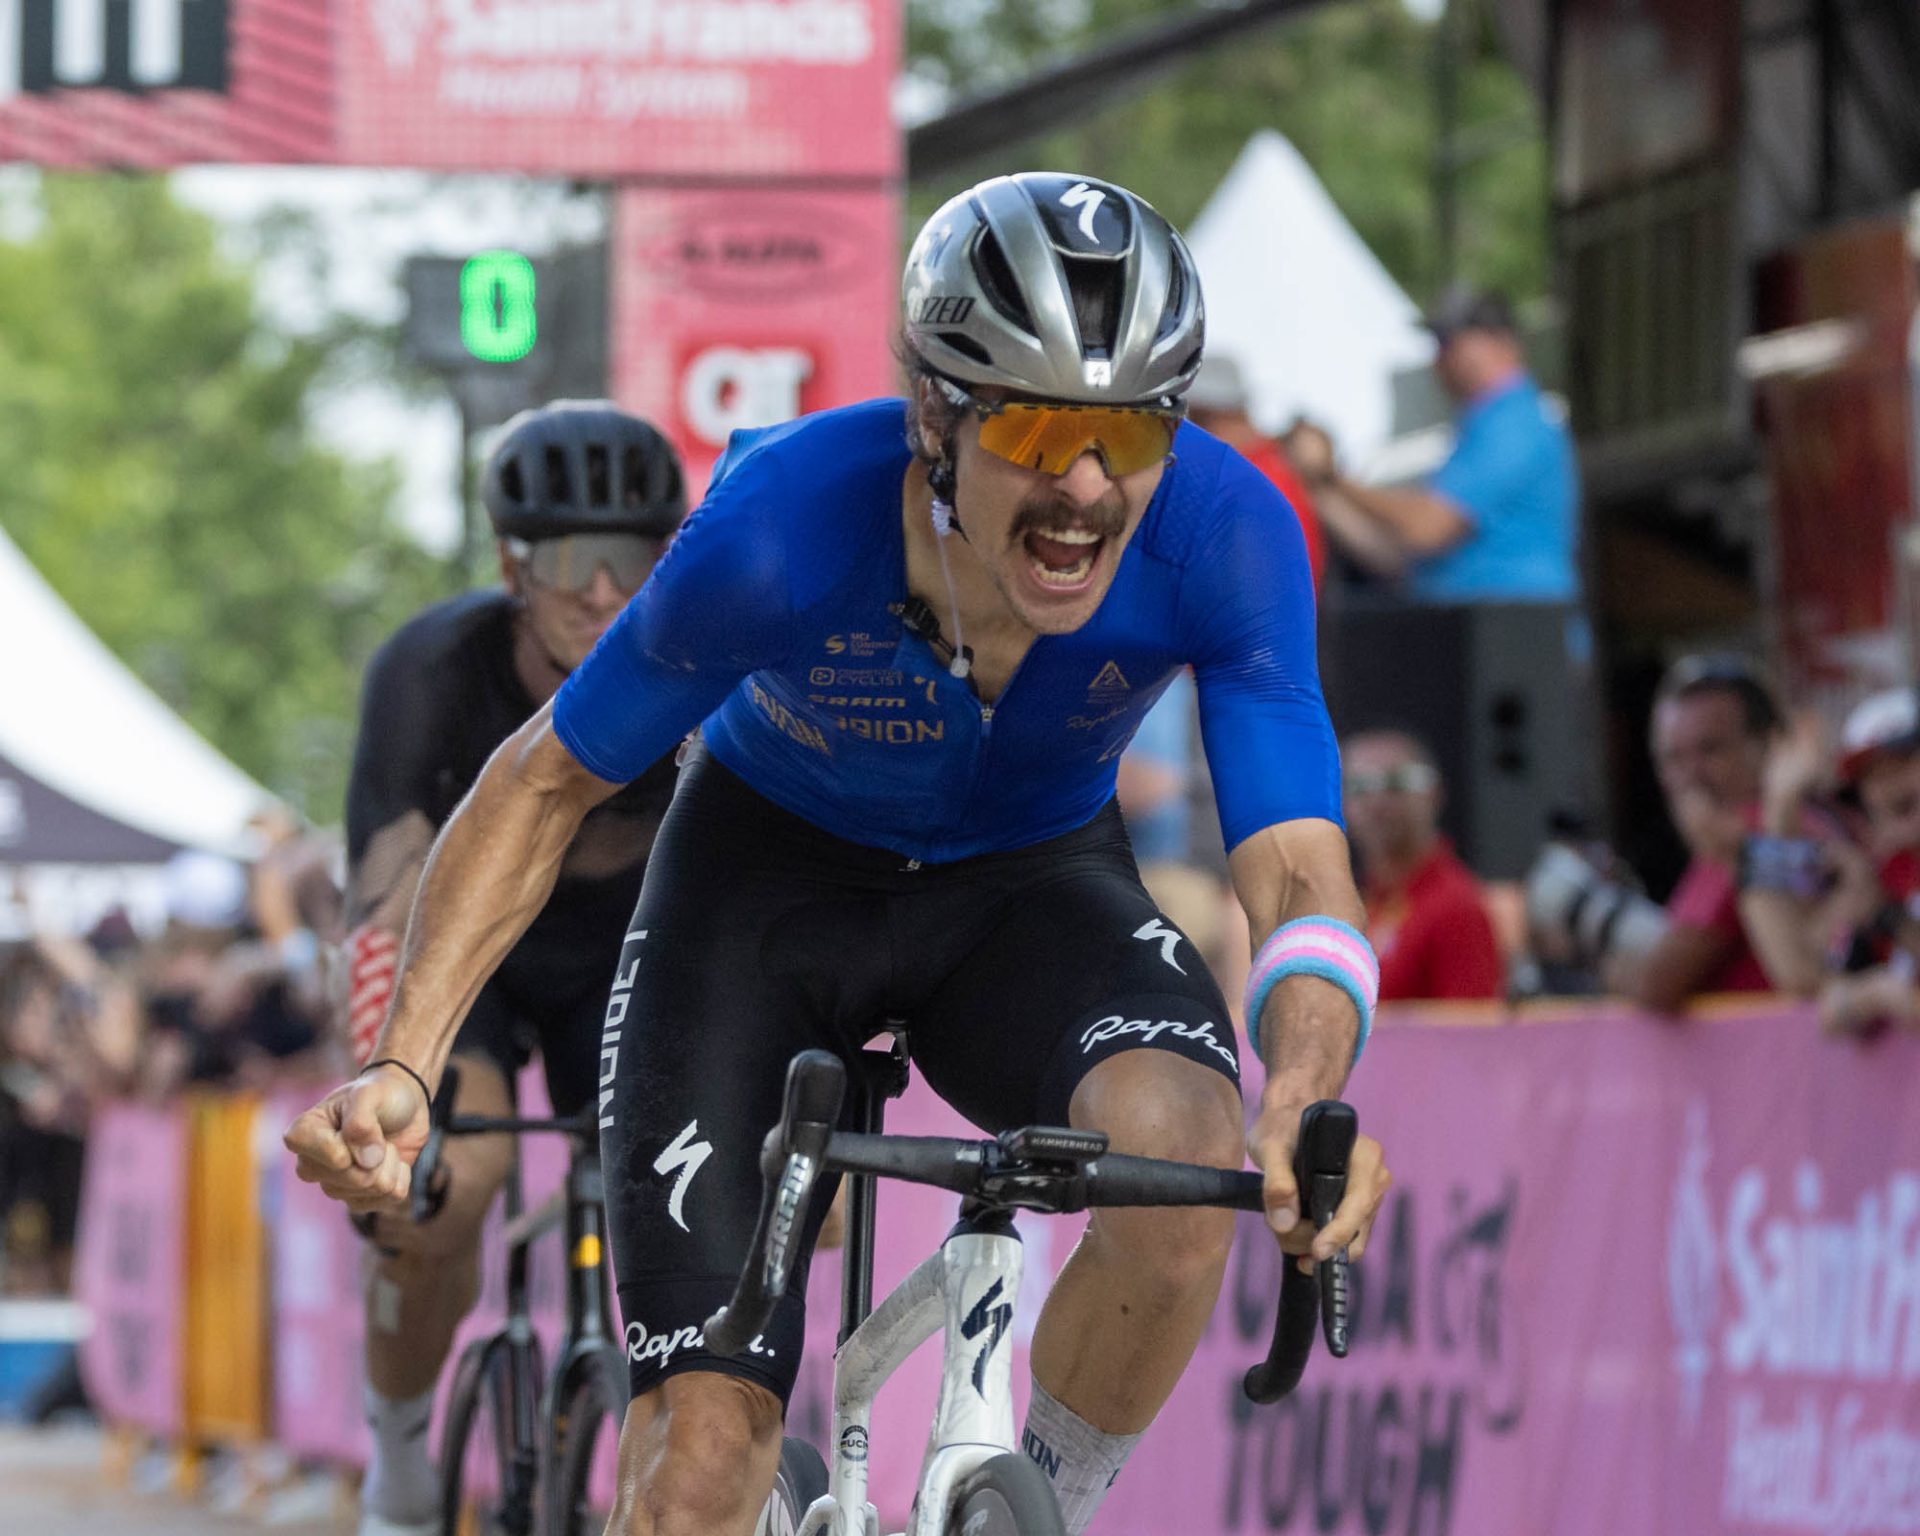 Sam Boardman celebrates as he wins Tulsa Tough. It's immediately post-sprint and he has one hand off the bars, clenched in a fist, while his mouth is open in a celebratory yell. On his left forearm is the blue, pink, and white armband to signify support for trans rights.